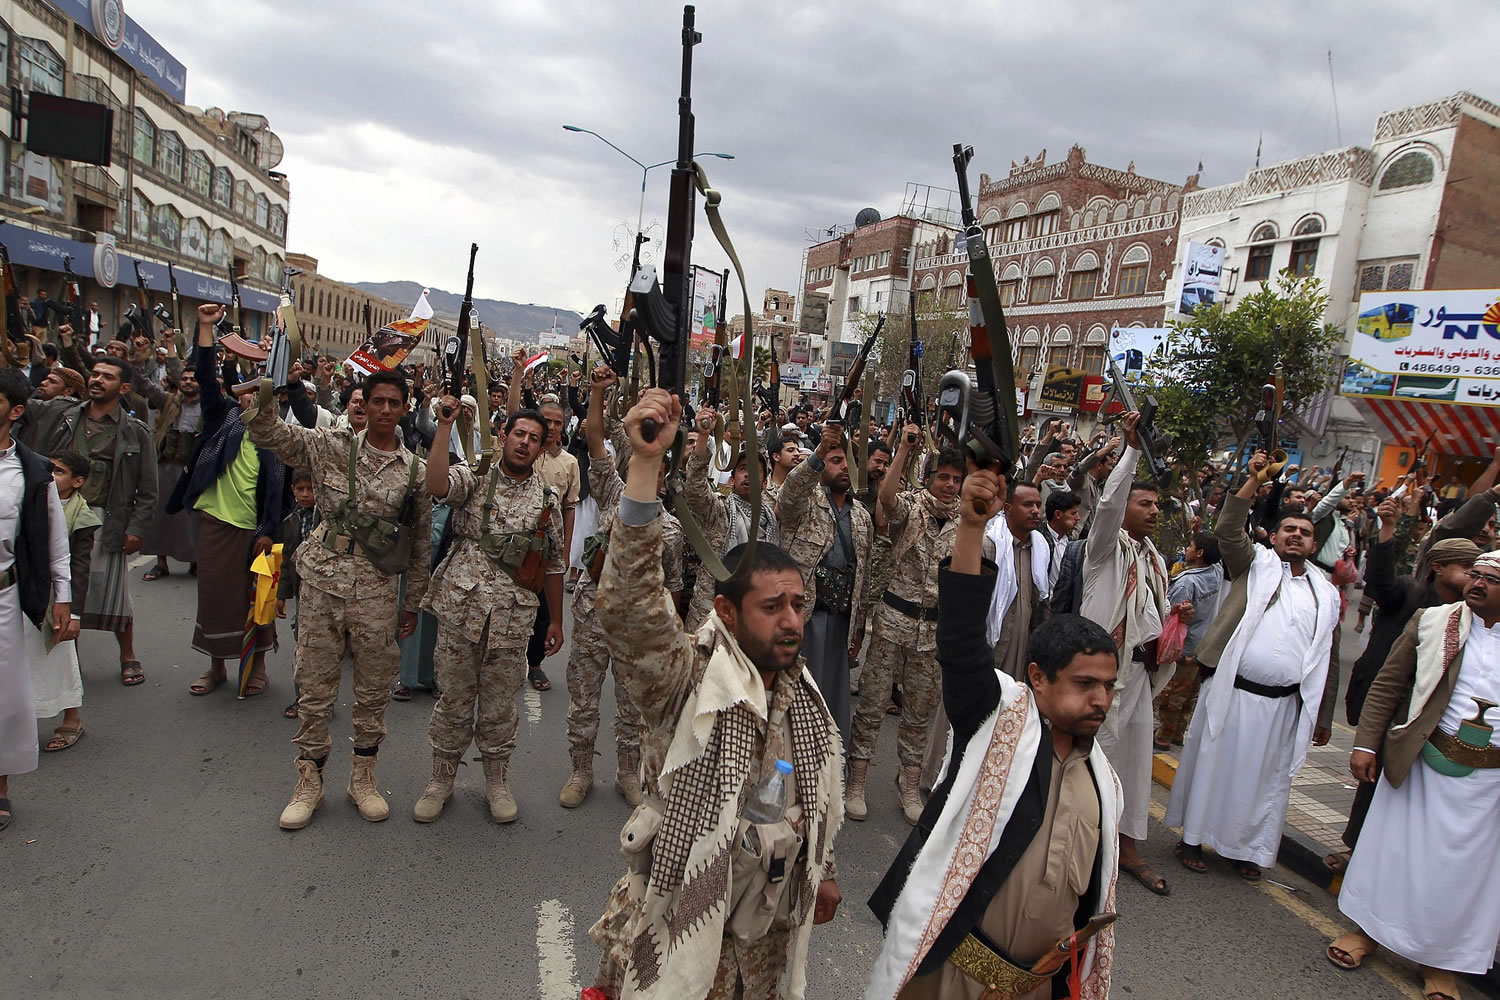 Shiite rebels, known as Houthis, hold up their weapons to protest against Saudi-led airstrikes, as they chant slogans during a rally in Sanaa, Yemen, on Thursday.